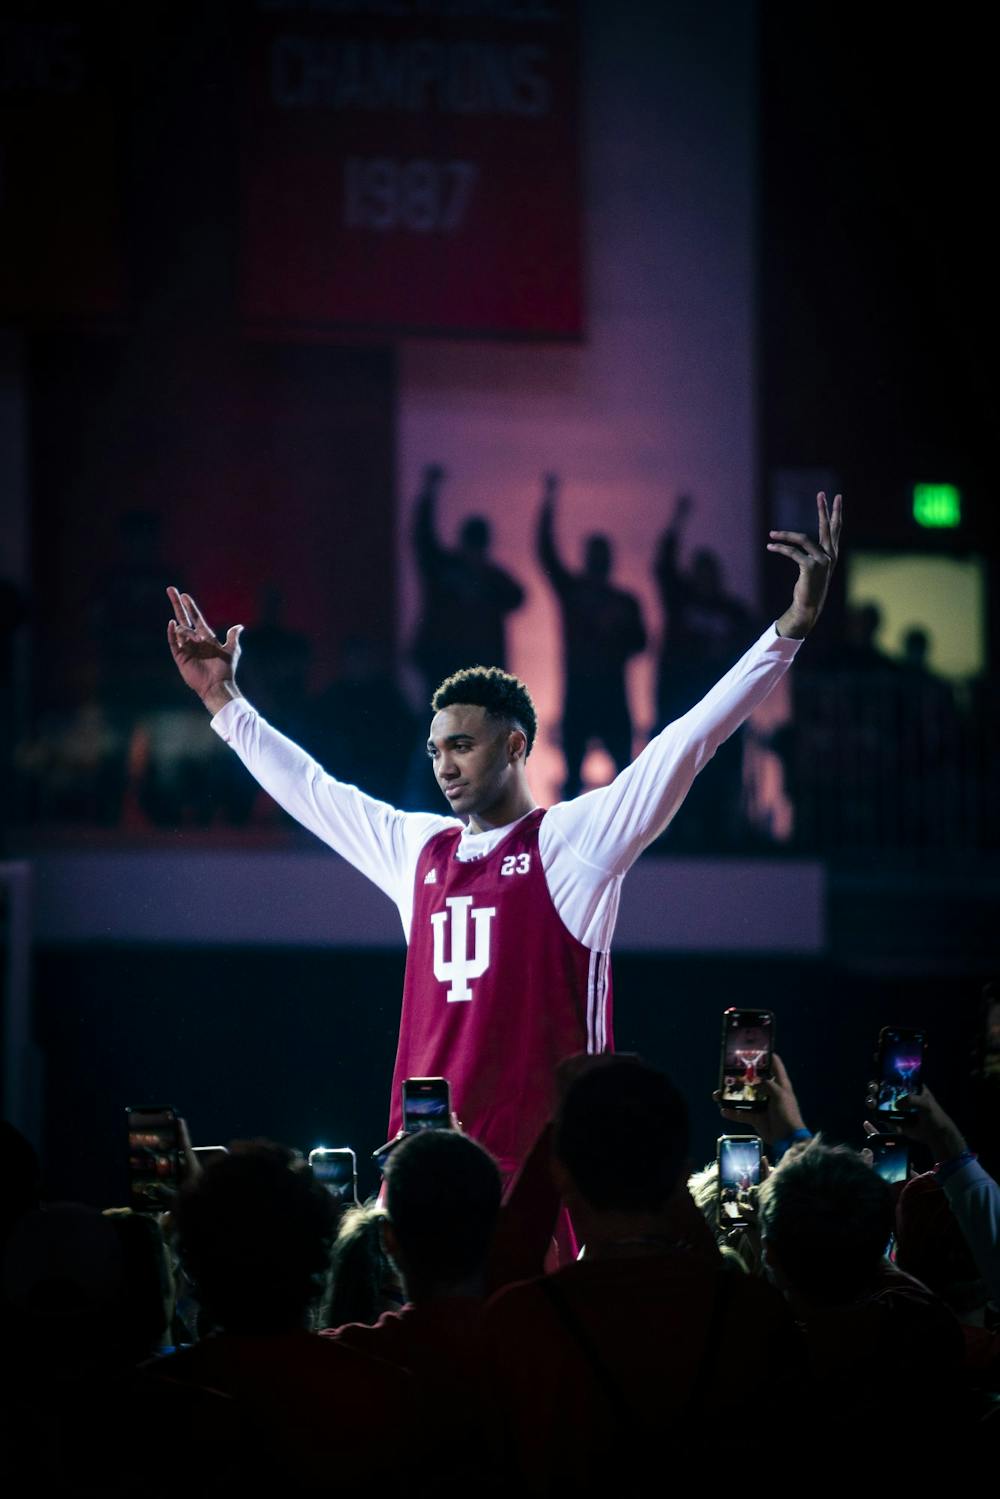 <p>Senior forward Trayce Jackson-Davis takes the stage during his introduction at Simon Skjodt Assembly Hall for Hoosier Hysteria on Oct. 7, 2022. The men&#x27;s basketball team will begin the season with an exhibition against Marian University at 3 p.m. Oct. 29 at Assembly Hall.</p>